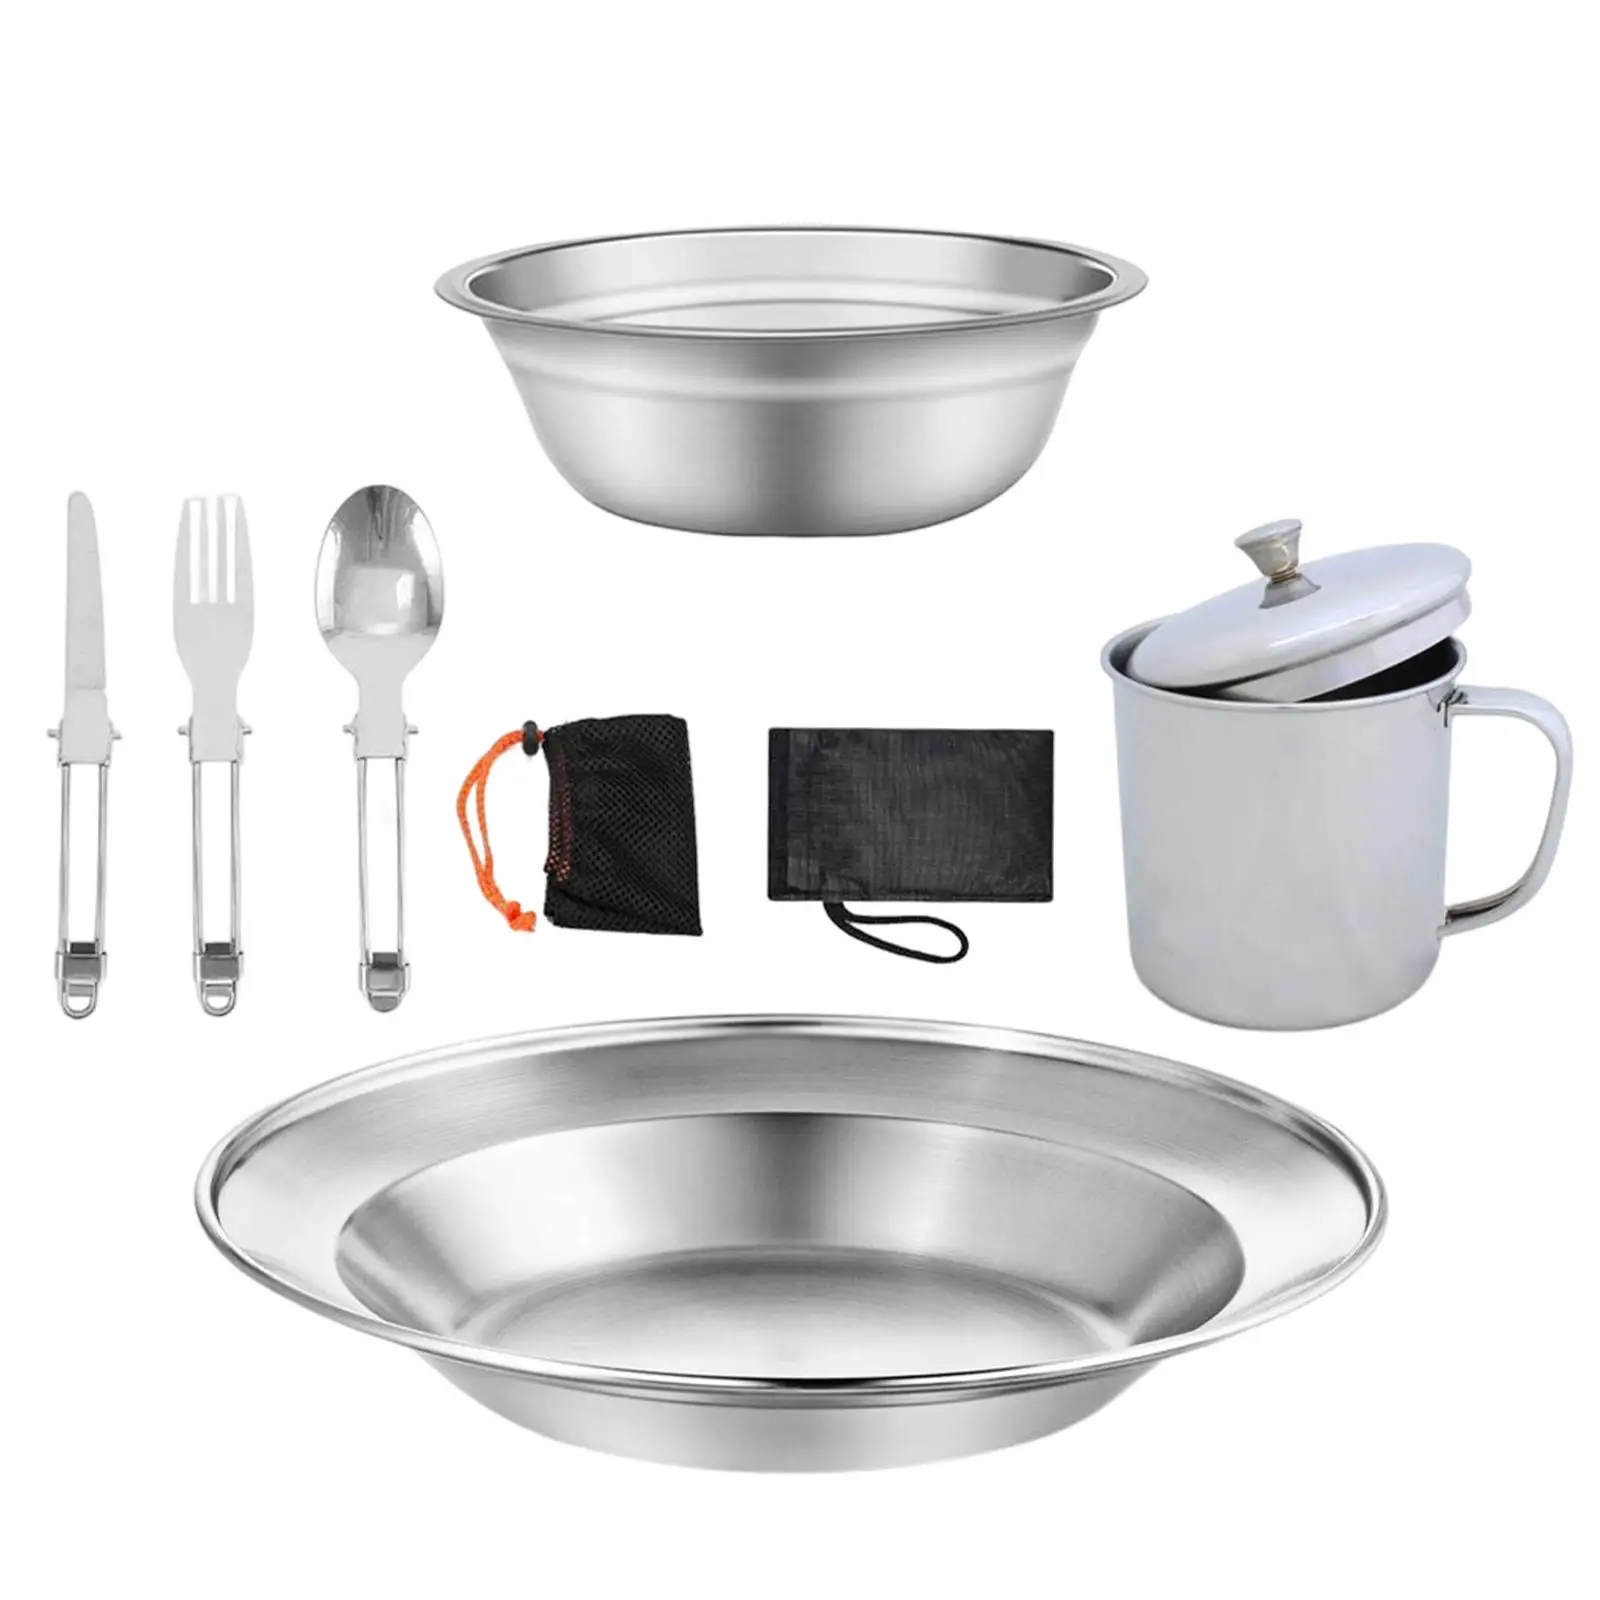 Portable Camping Cutlery Set Stainless Steel for Outdoor Cooking Includes Plate Bowl Cup Spoon Fork Space Saving Durable